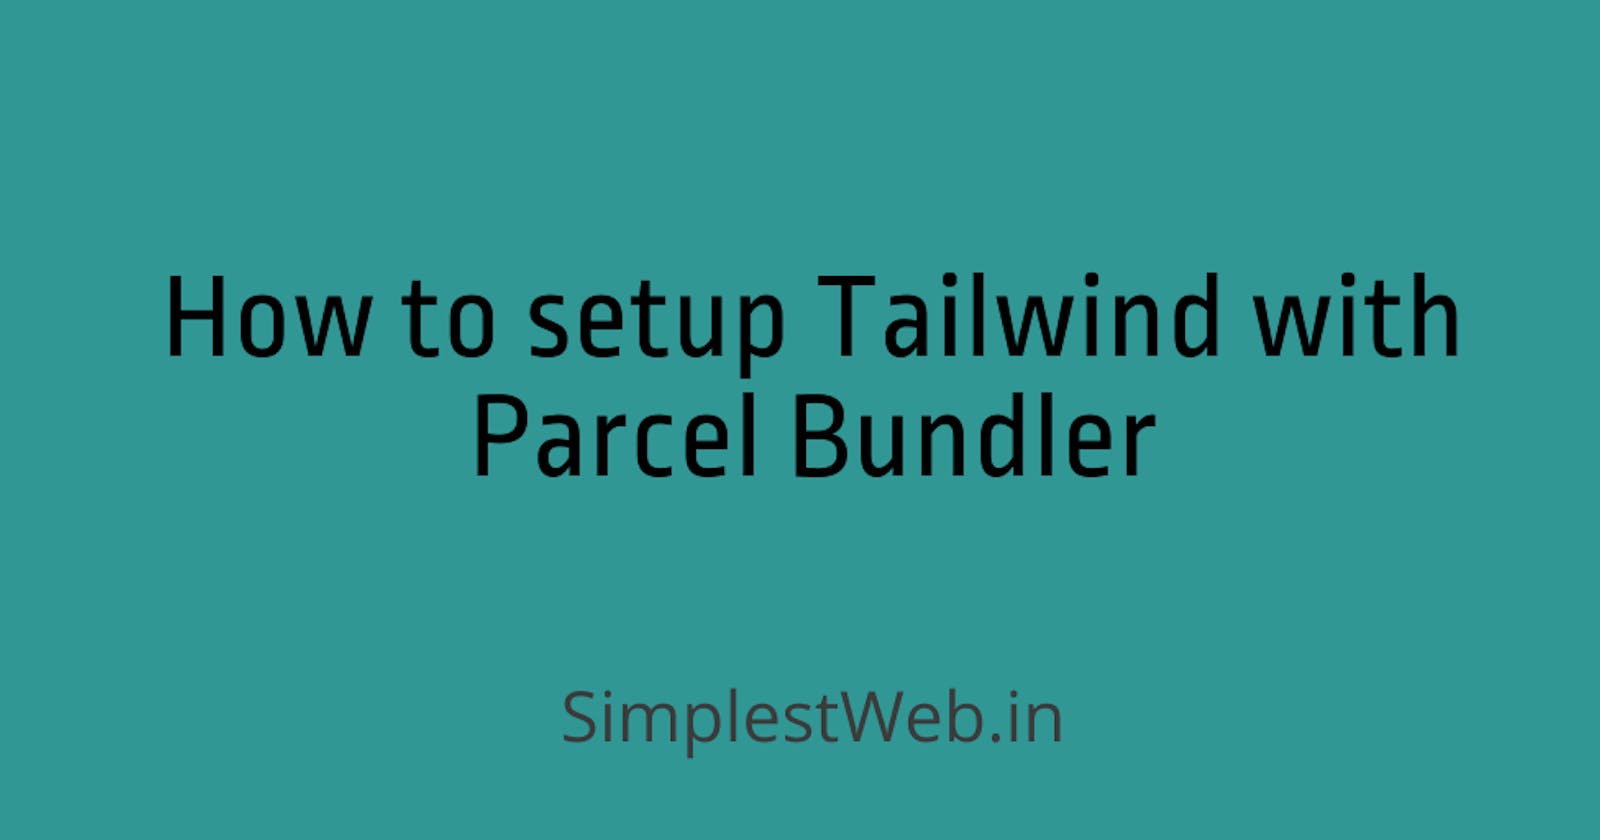 How to setup Tailwind CSS with Parcel Bundler